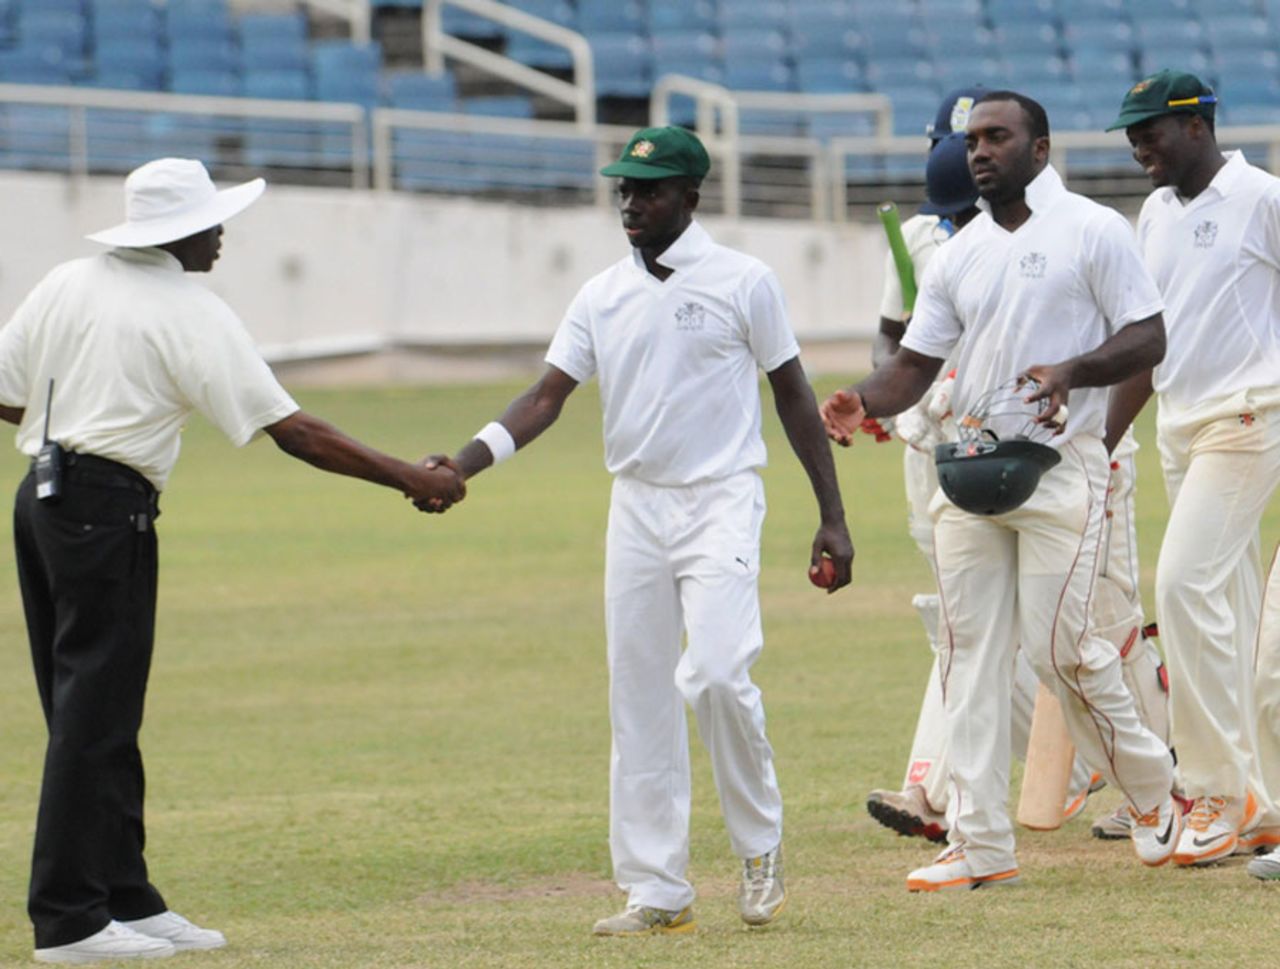 Nikita Miller is congratulated for his matchwinning effort, Jamaica v Barbados, Regional Four Day Competition, Sabina Park, Kingston, Jamaica, February 12, 2012